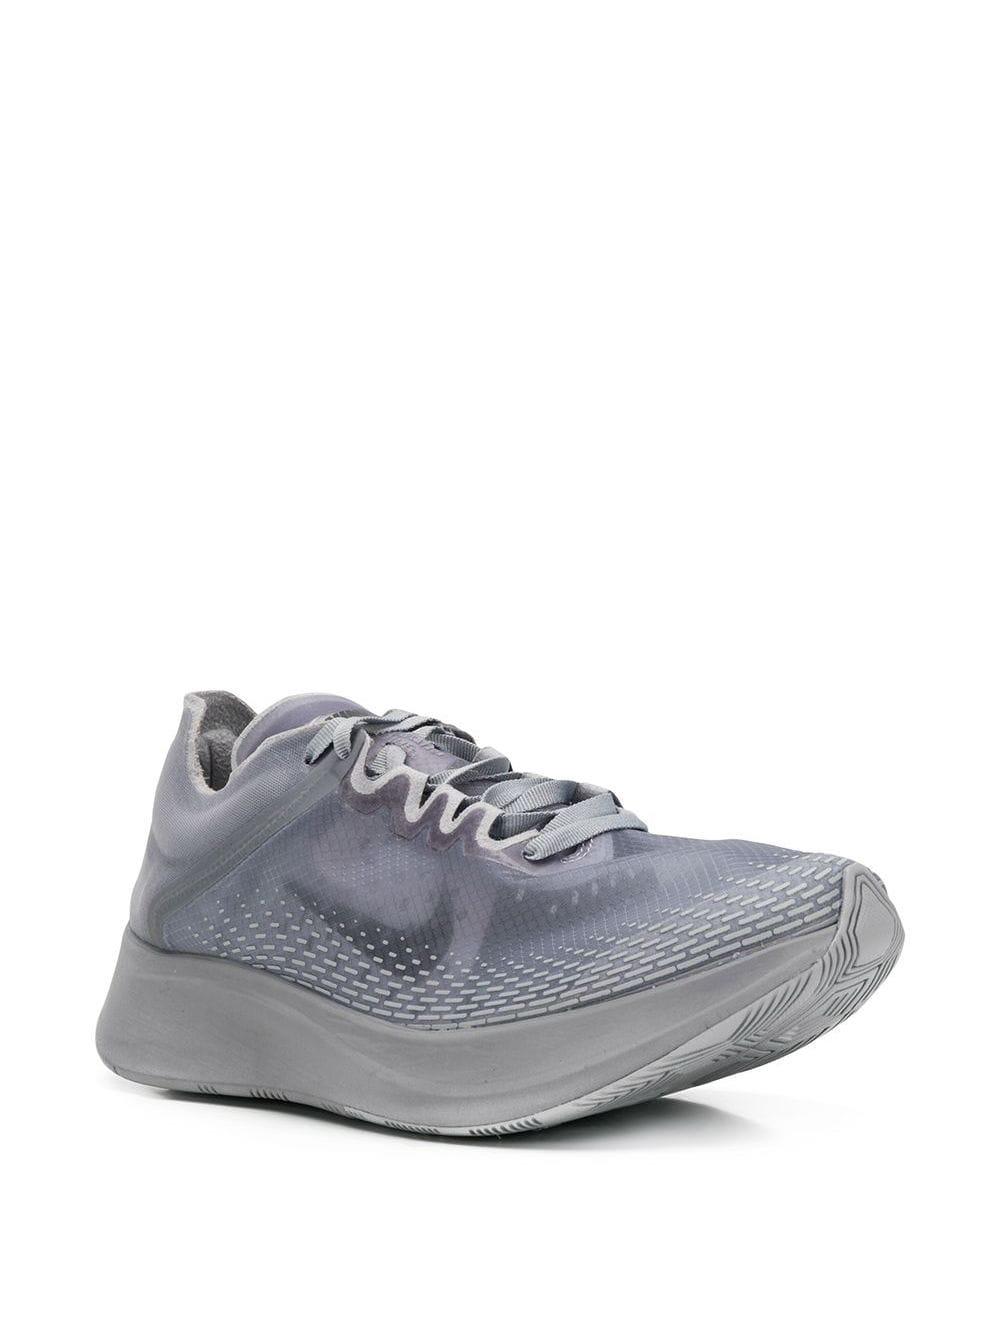 Nike Zoom Fly Sp Fast Sneakers in Grey (Grey) for Men - Save 44% - Lyst